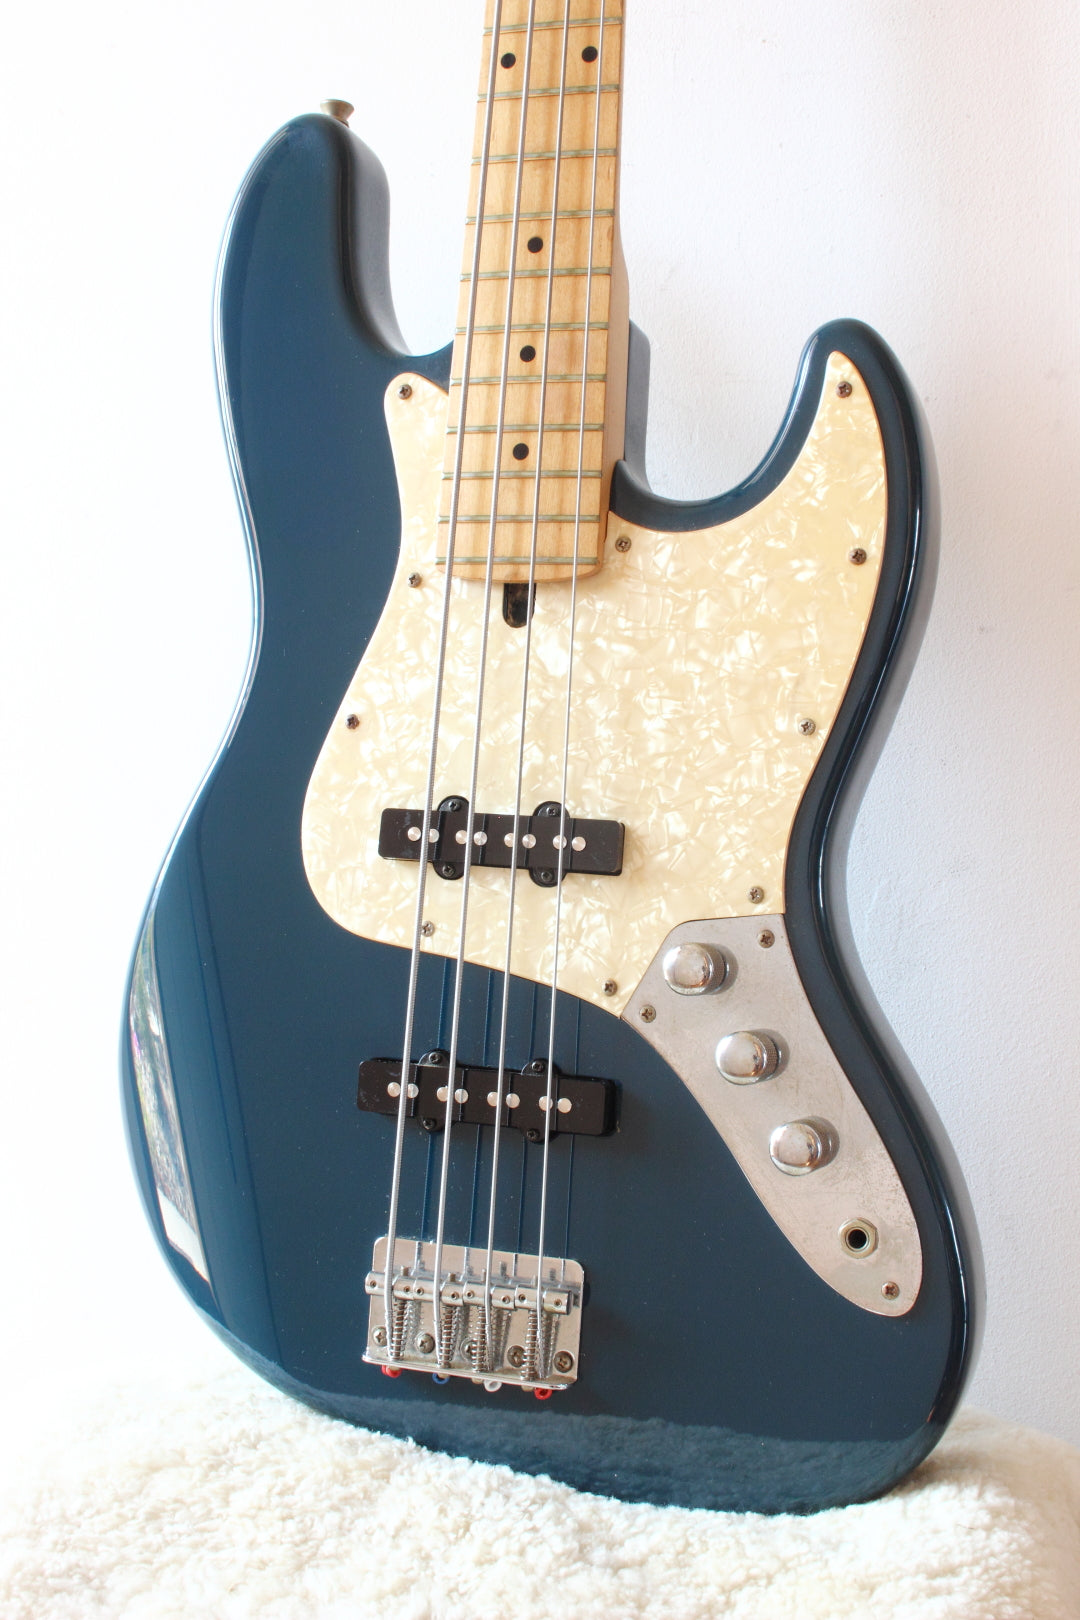 Brian by Bacchus JB-Style Teal Circa 1998 – Topshelf Instruments